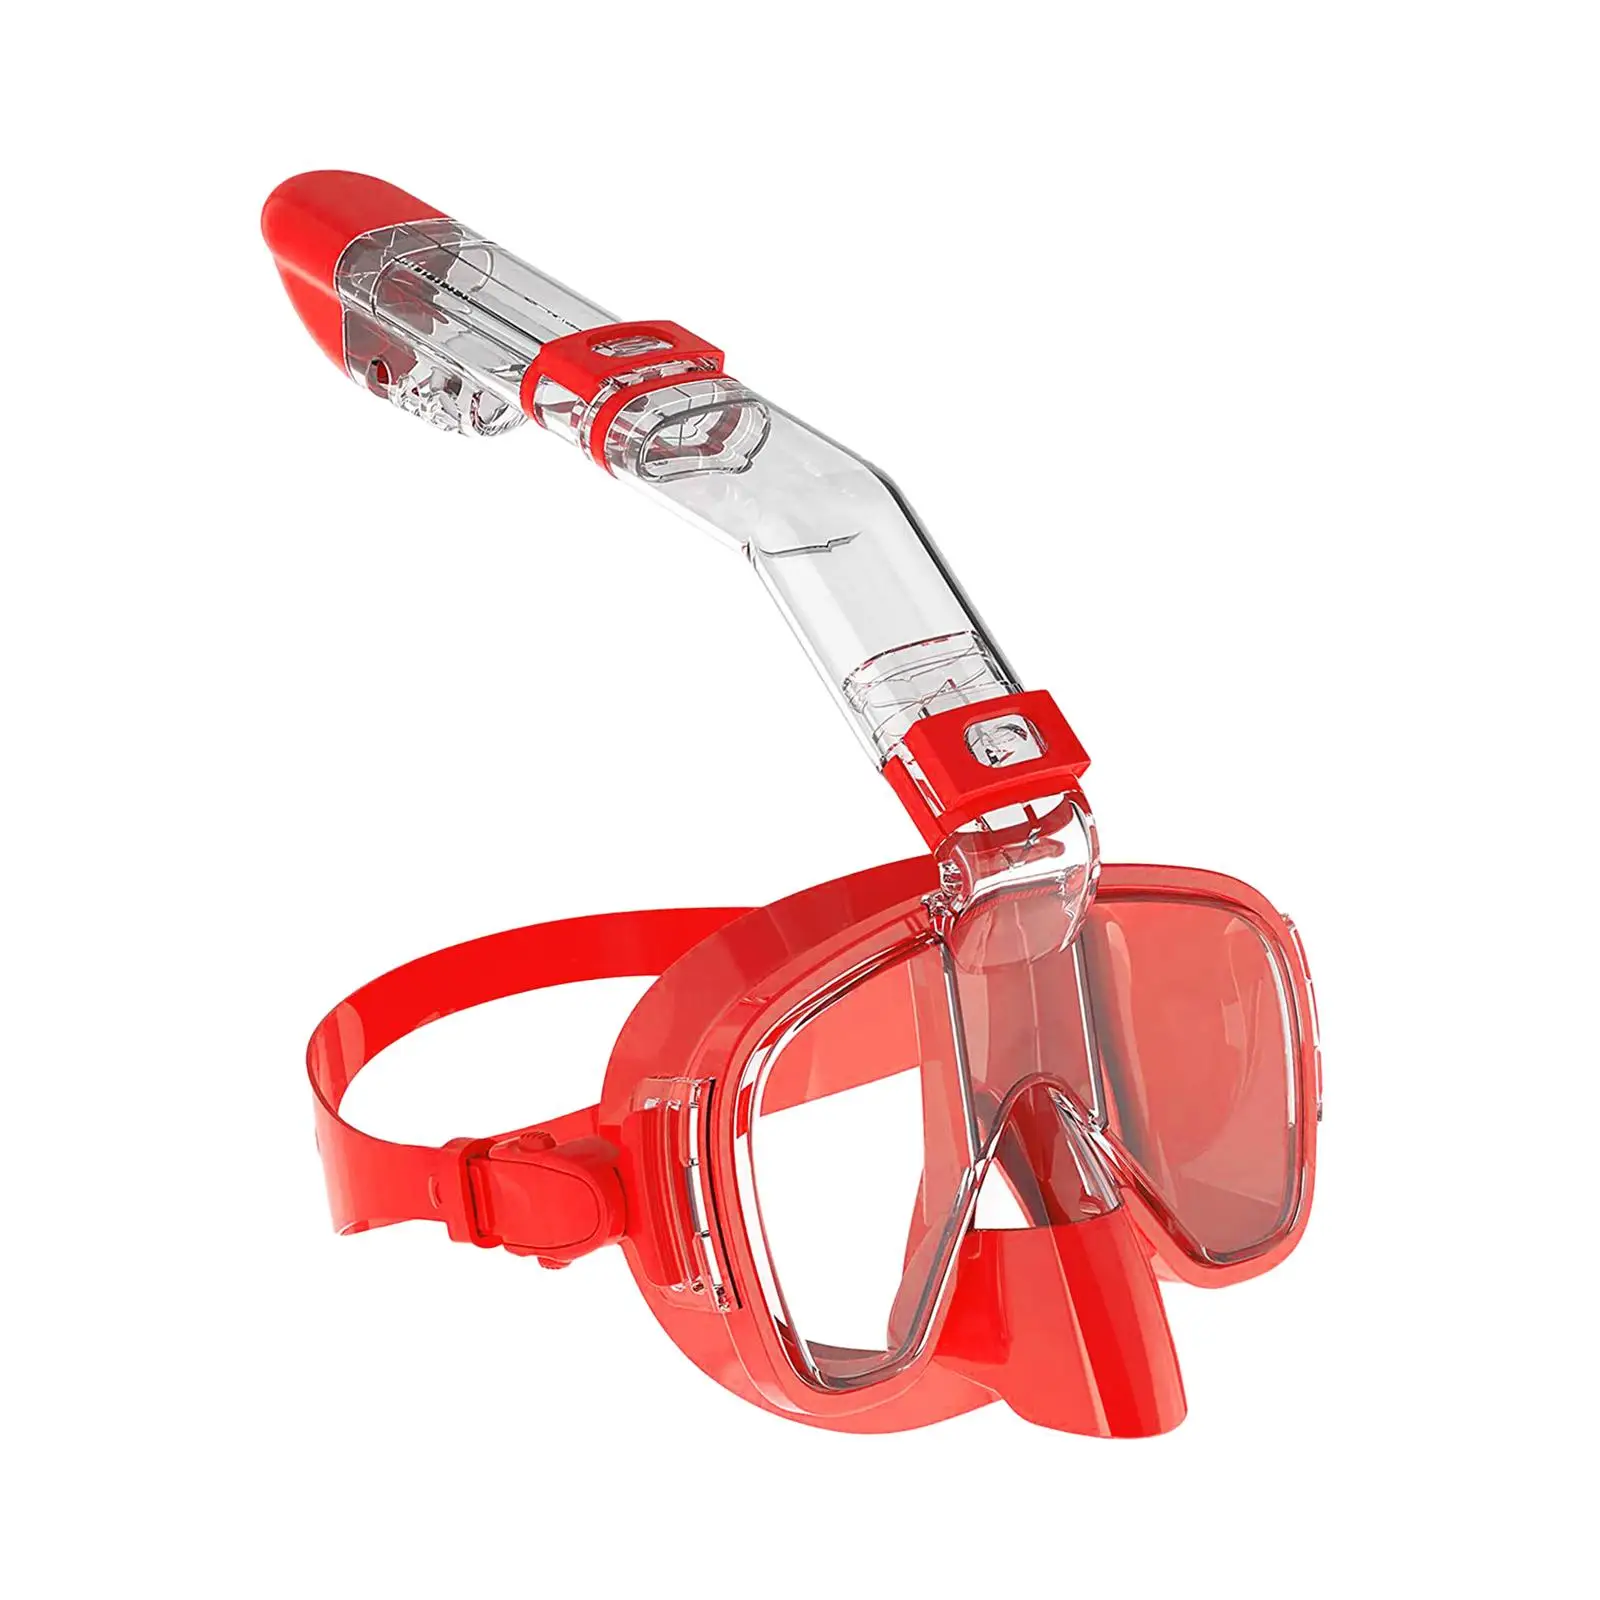 Snorkel Set Portable Snorkeling Gear for Scuba Diving Swimming Accessories